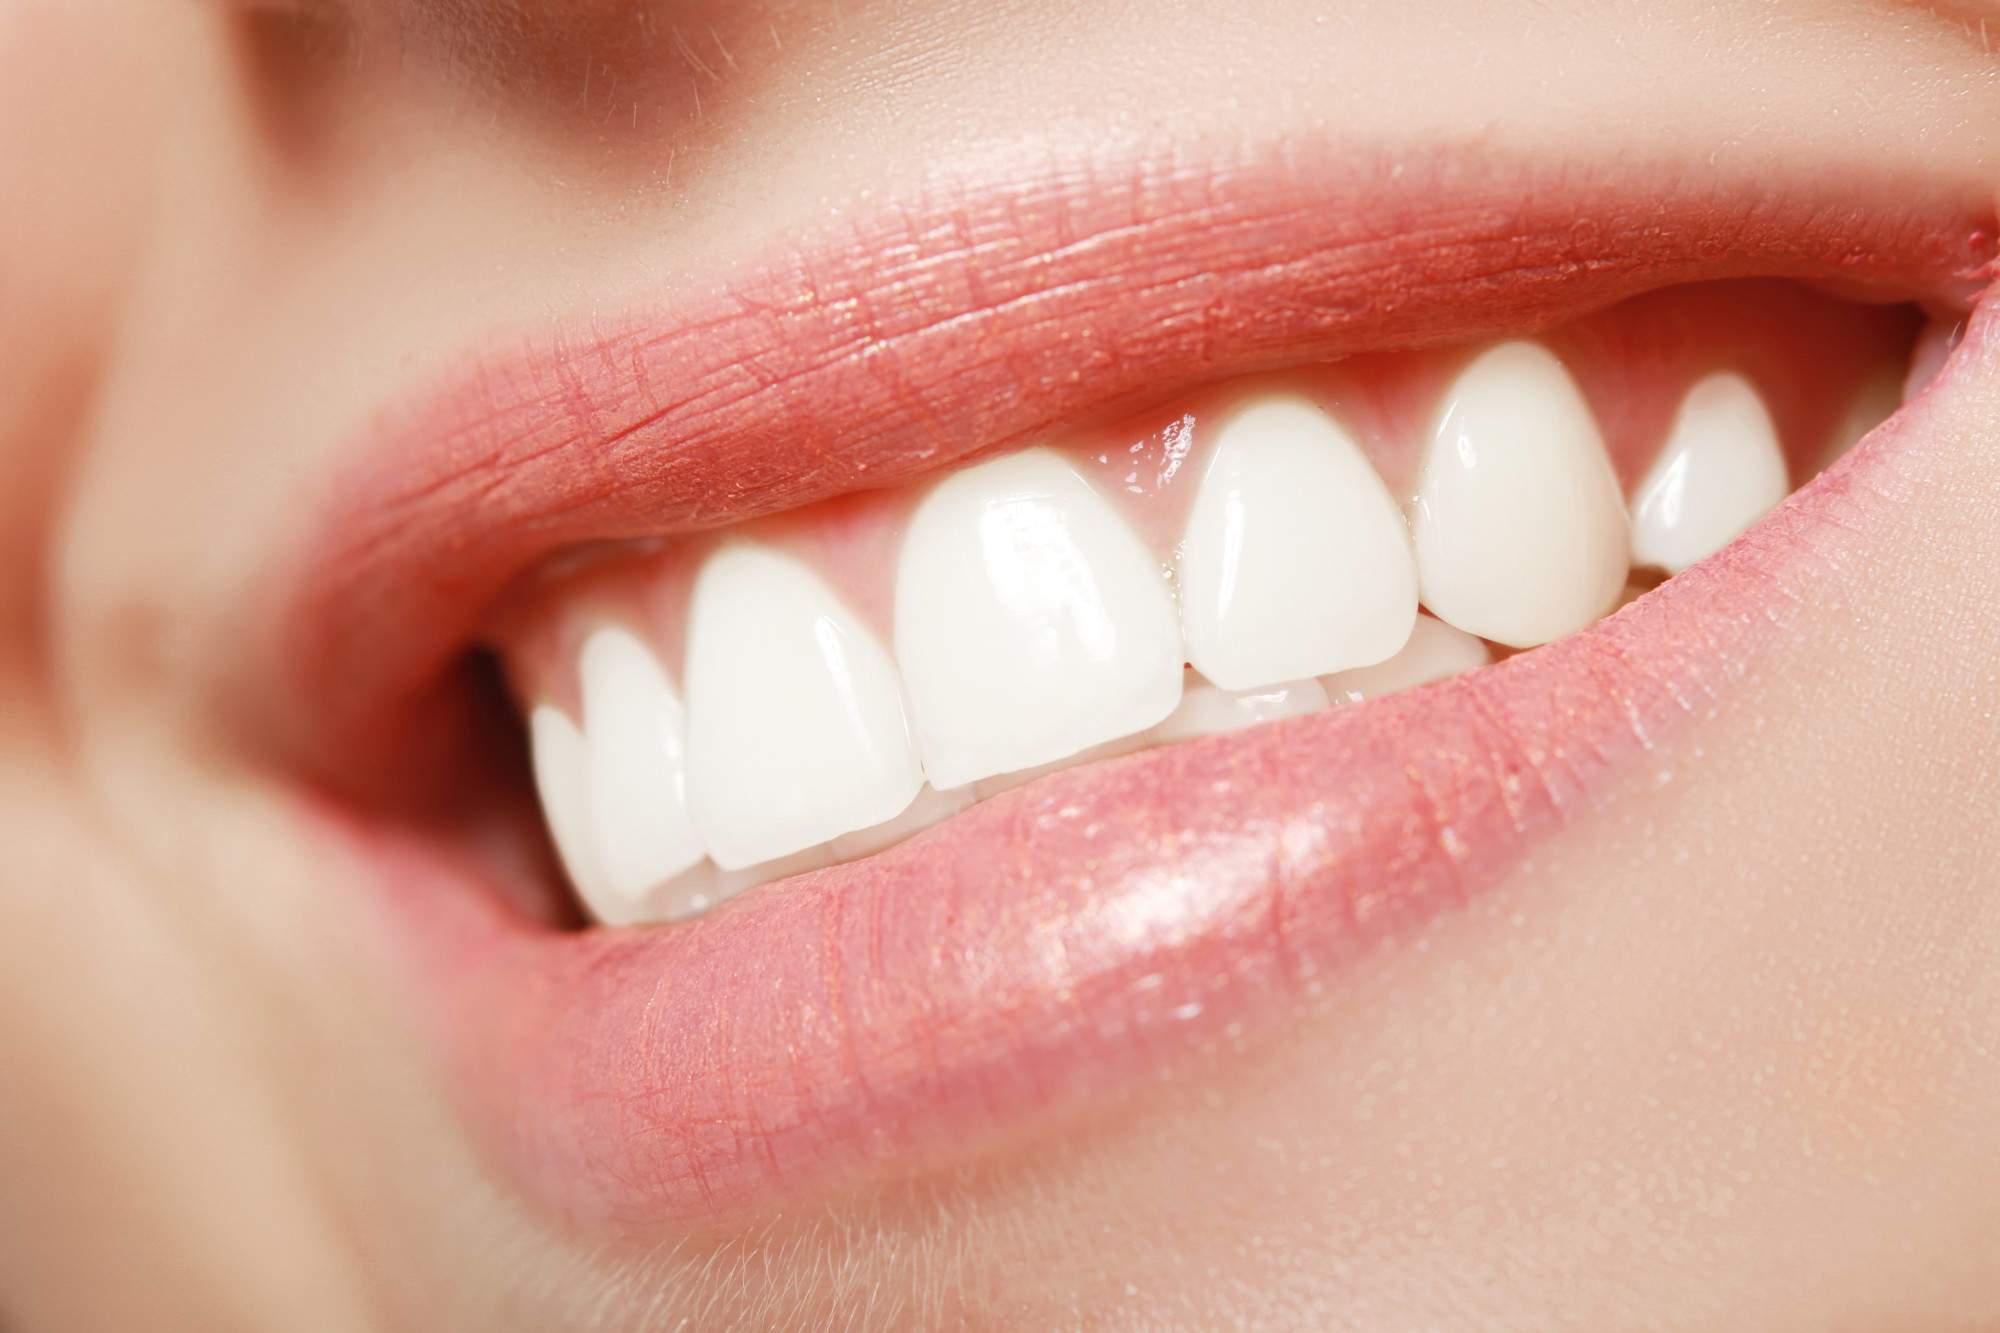 What Are the Best Tips for Healthy Gums and Teeth?